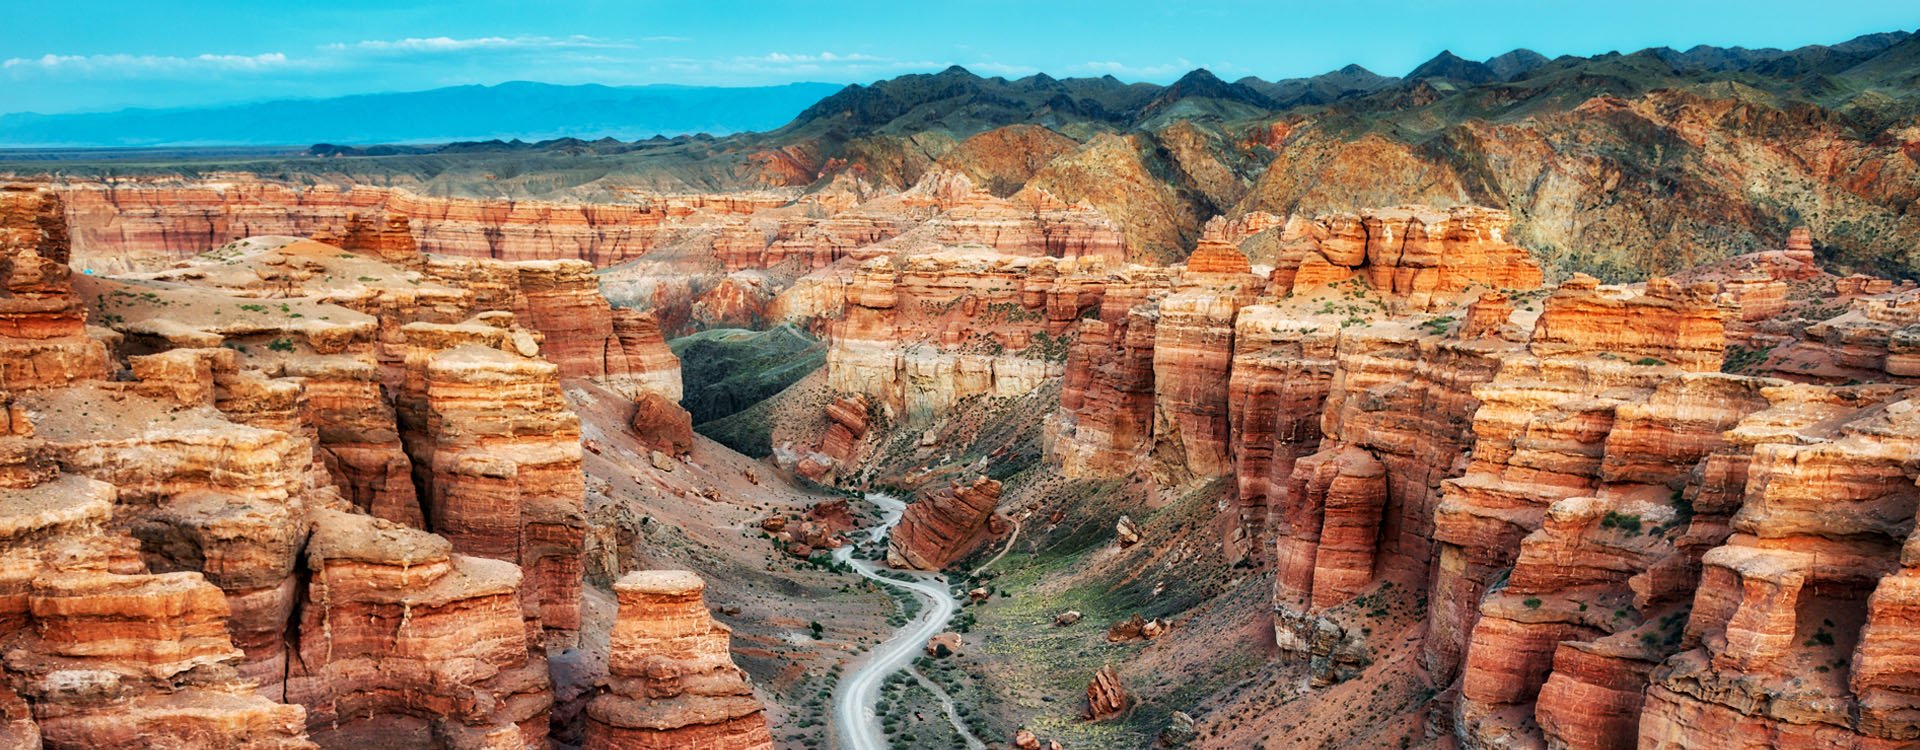 Charyn Canyon in South East Kazakhstan, red soil formation